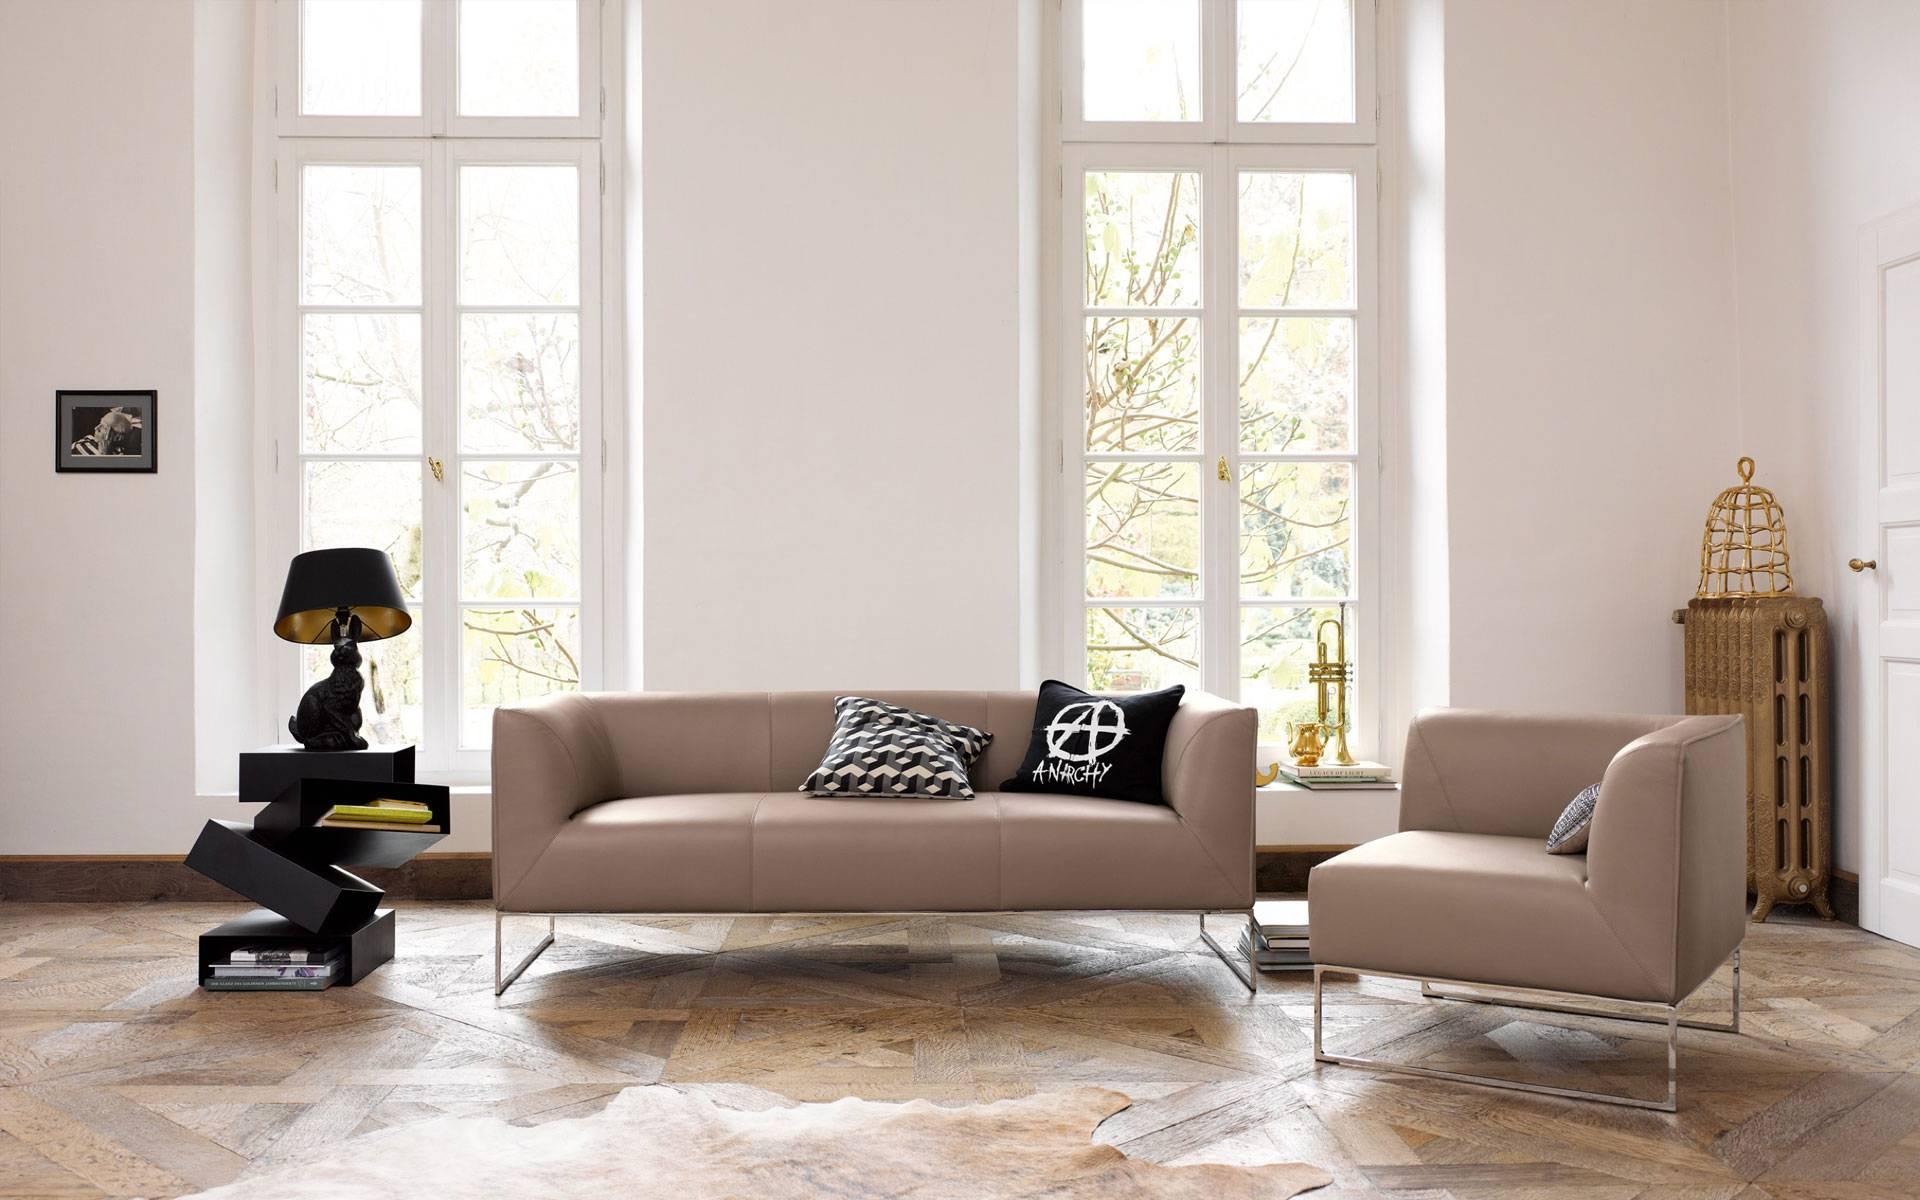 Mel lounge sofa without loose cushions by COR.

Design by ?Jehs & Laub.

Mell lounge masters the art of appearing to be invitingly comfortable and delicately elegant at the same time. This is thanks to the deep seating surfaces and cozy cushions